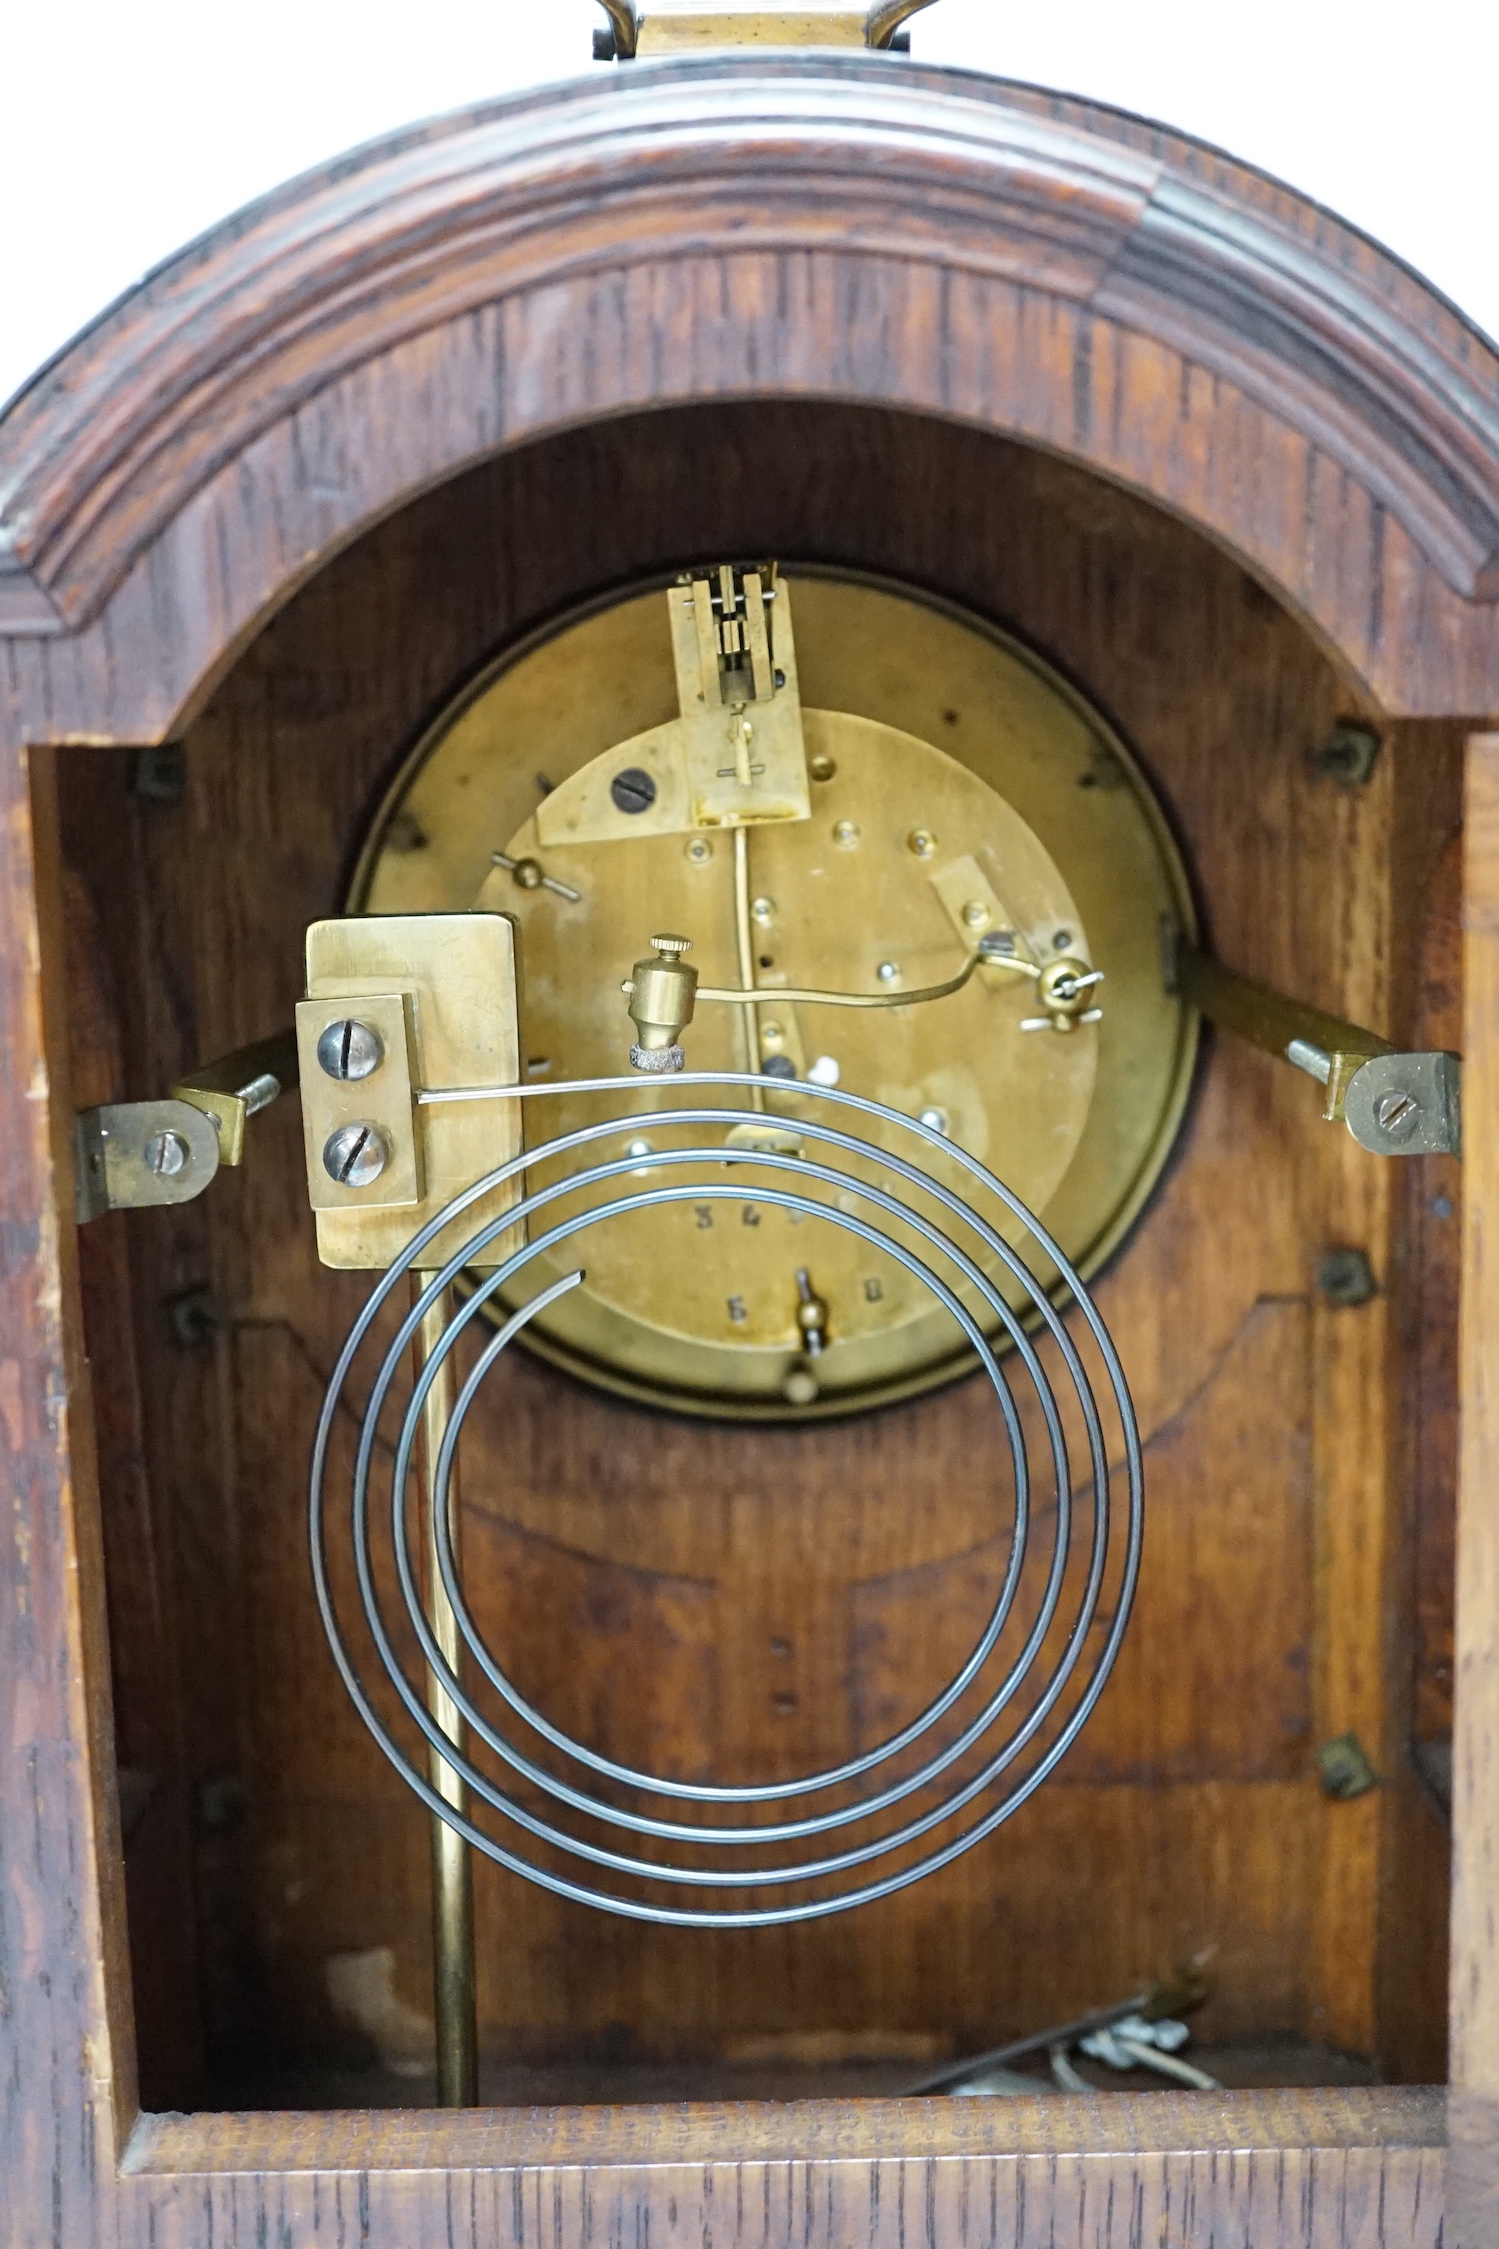 A oak mantel clock in a Regency style with pad top, striking on a coiled gong, 30cm high - Image 4 of 4